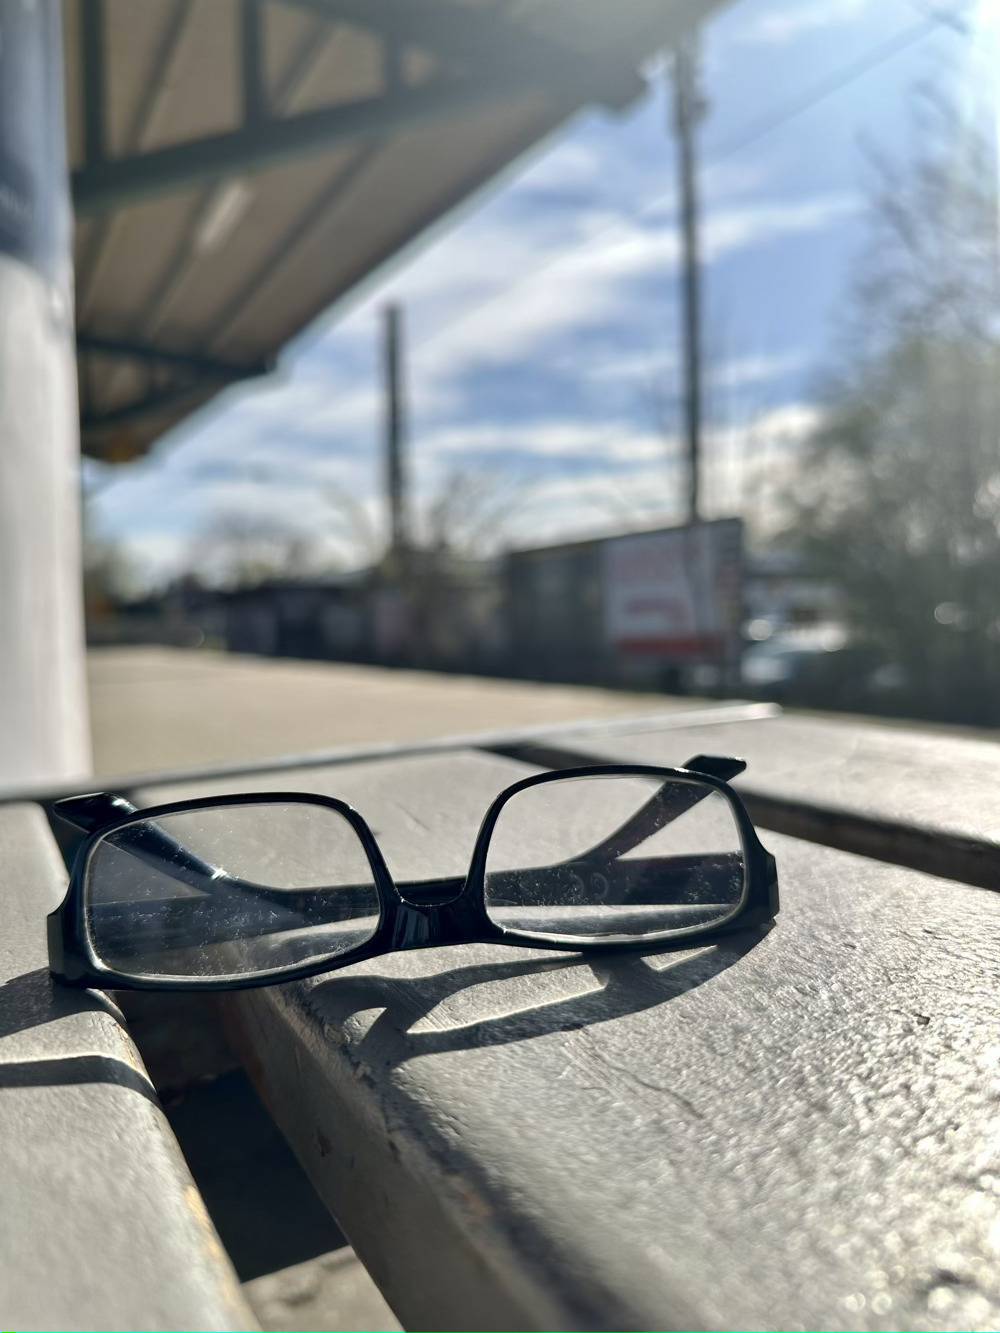 Pair of glasses sitting forgotten on a bench.